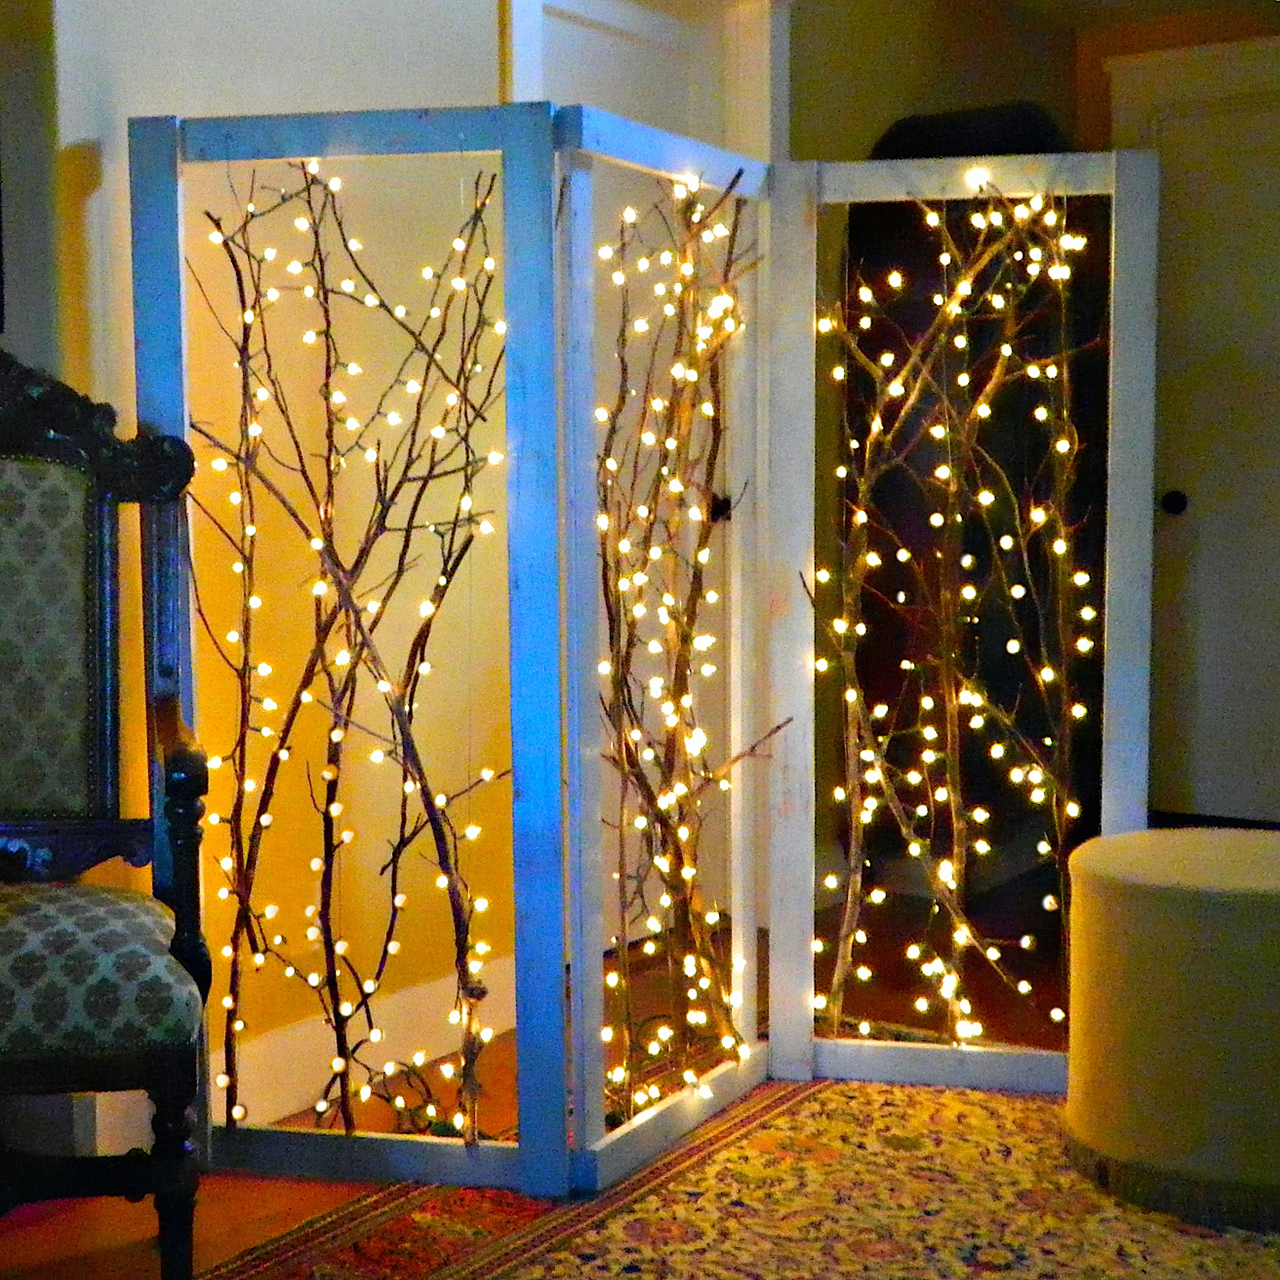 15 Gorgeous Ways to Decorate with String Lights